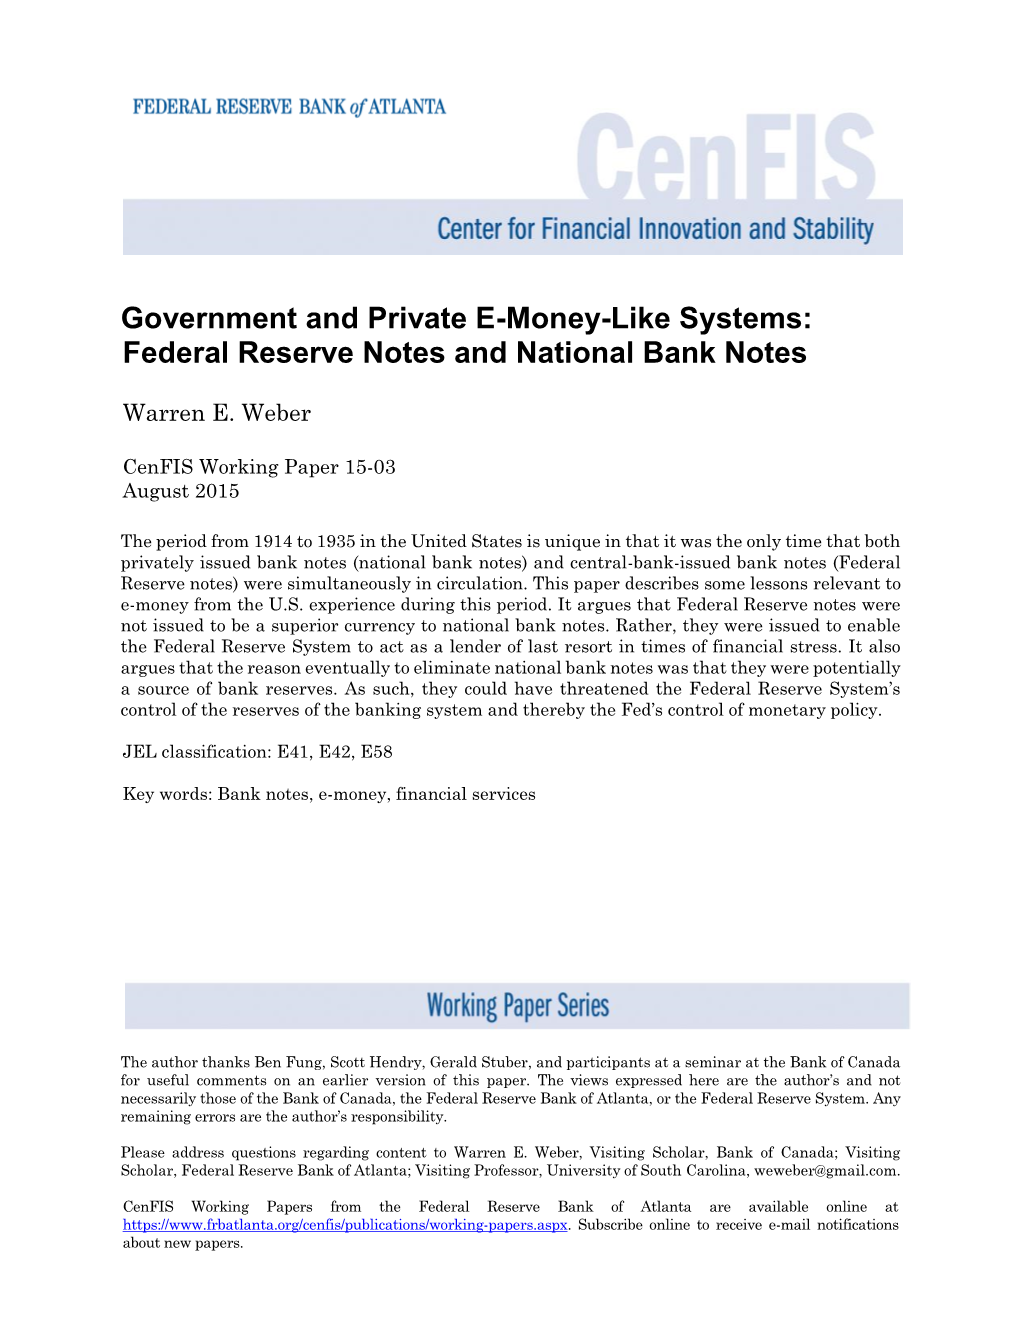 Federal Reserve Notes and National Bank Notes